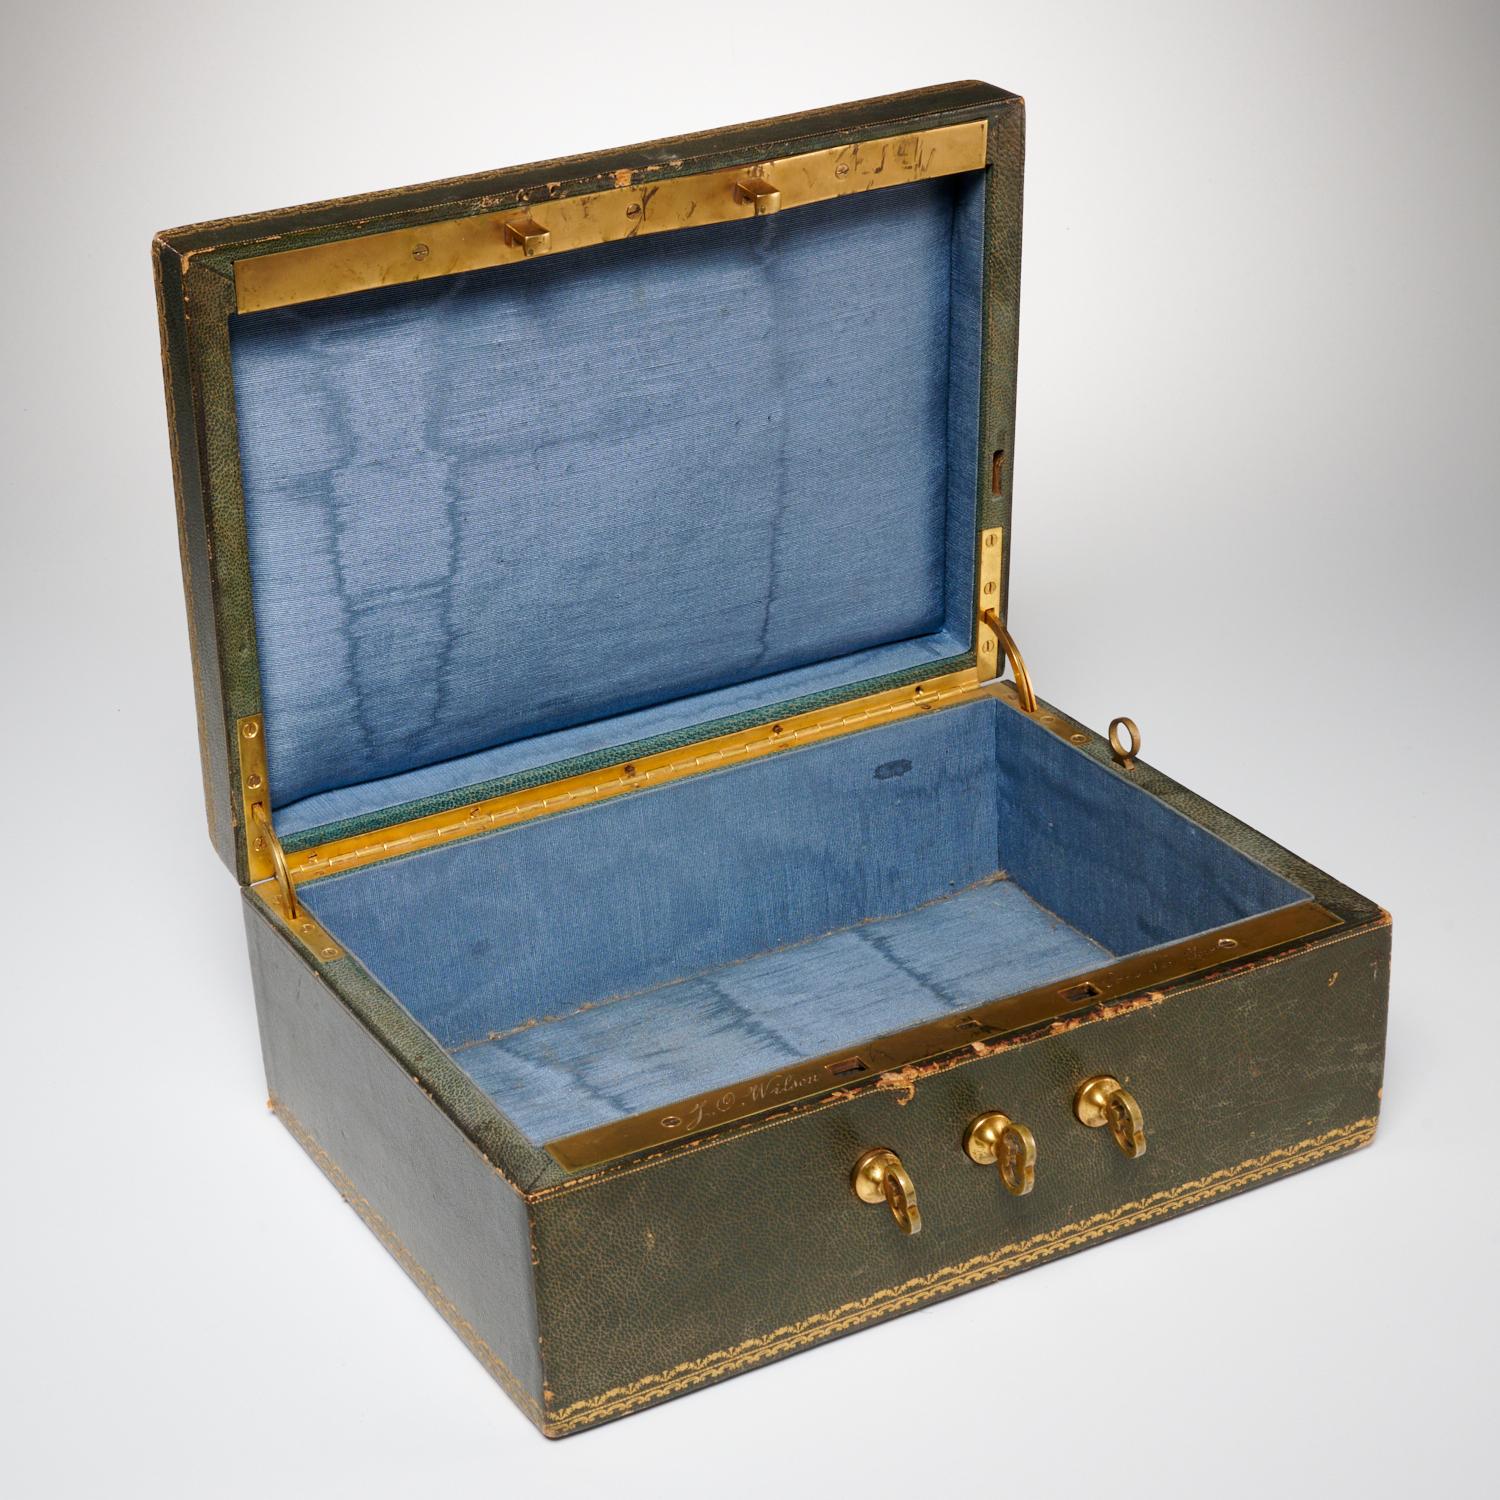 Early 20th c., leather document box with blue silk fabric lined interior, brass mounts and hinges, engraved by retailer 